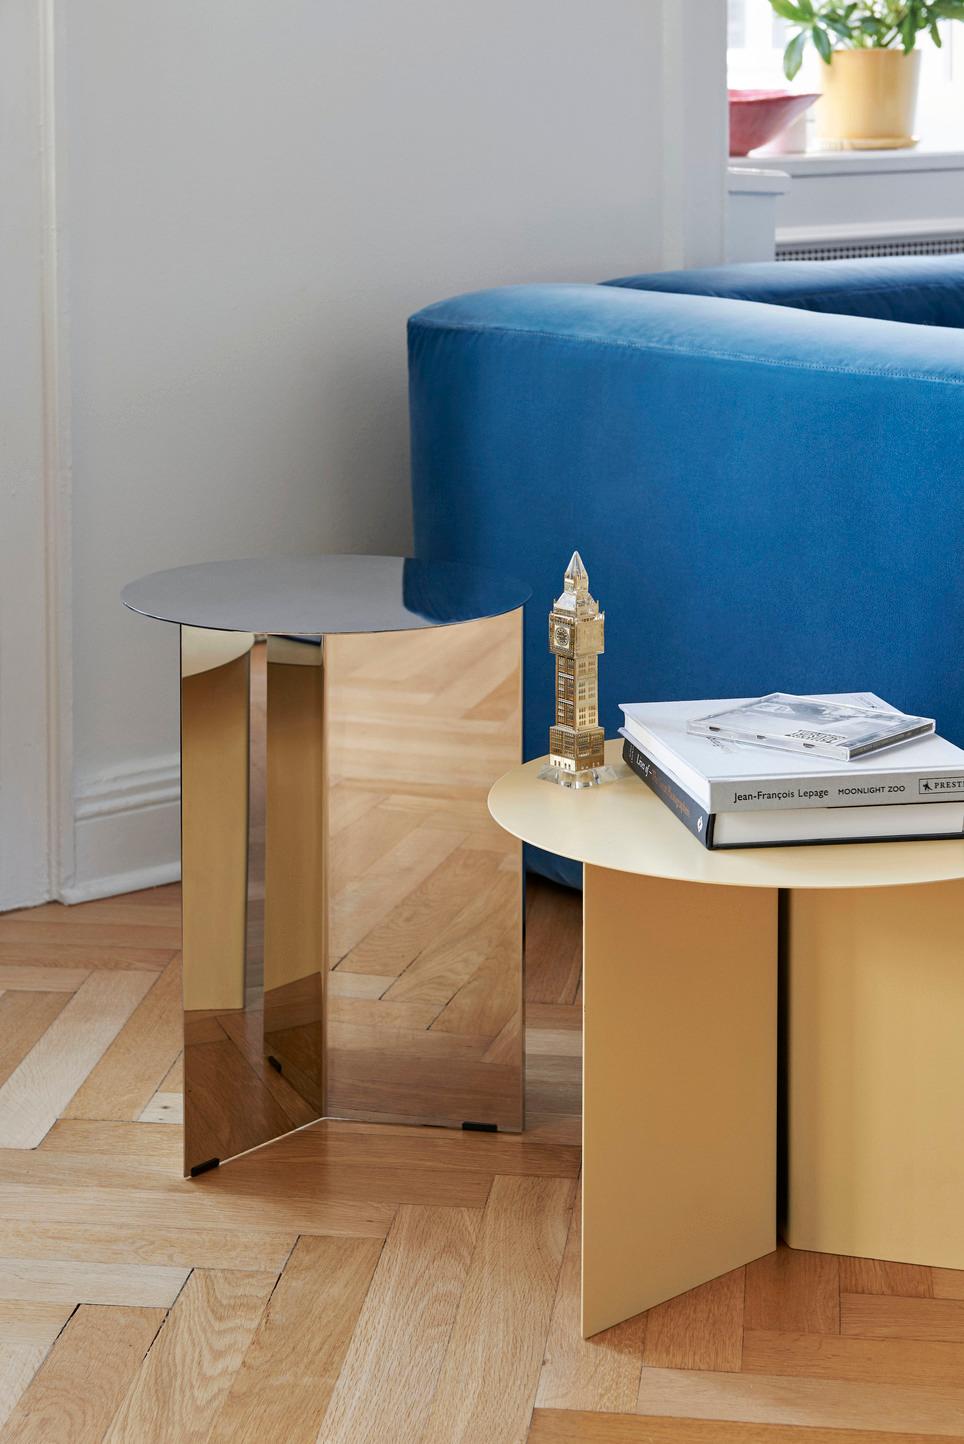 Hay’s slit table is a geometric steel side table inspired by paper origami techniques. The slim frame appears folded beneath the tabletop, creating a simple yet sculptural form that is reminiscent of traditional Japanese paper art.
Compact and